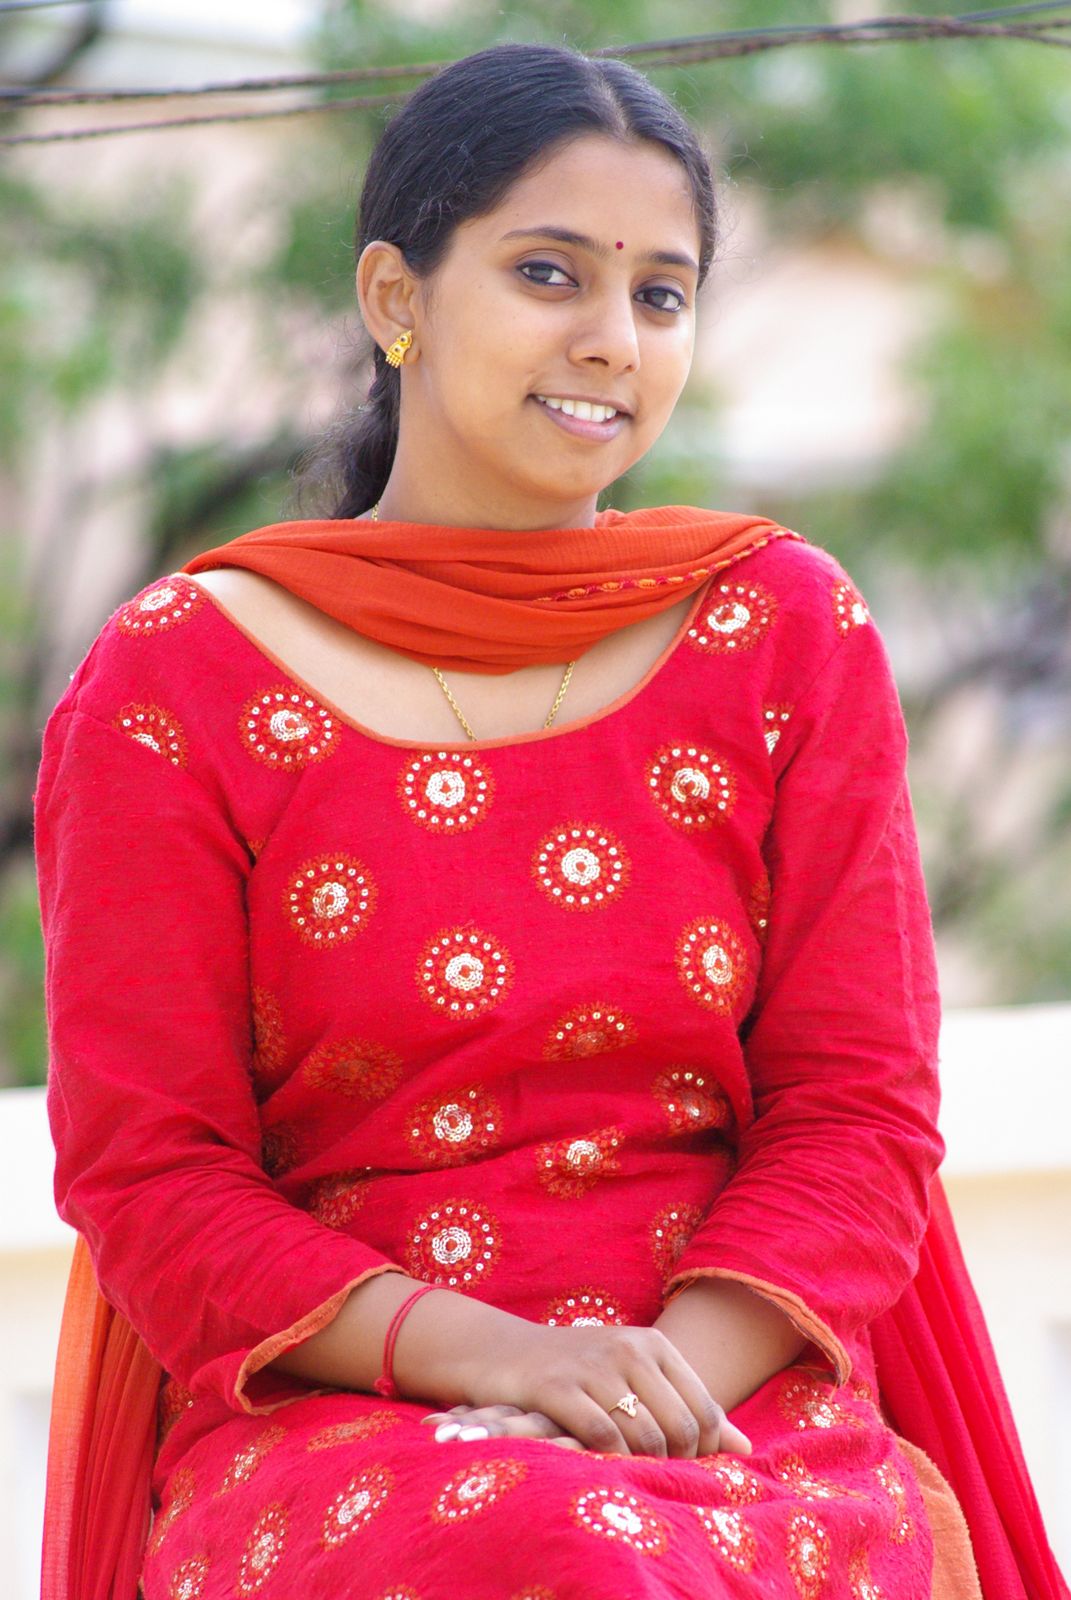 Real Life Mallu Girls Clik Pictures To Enlarge-5112